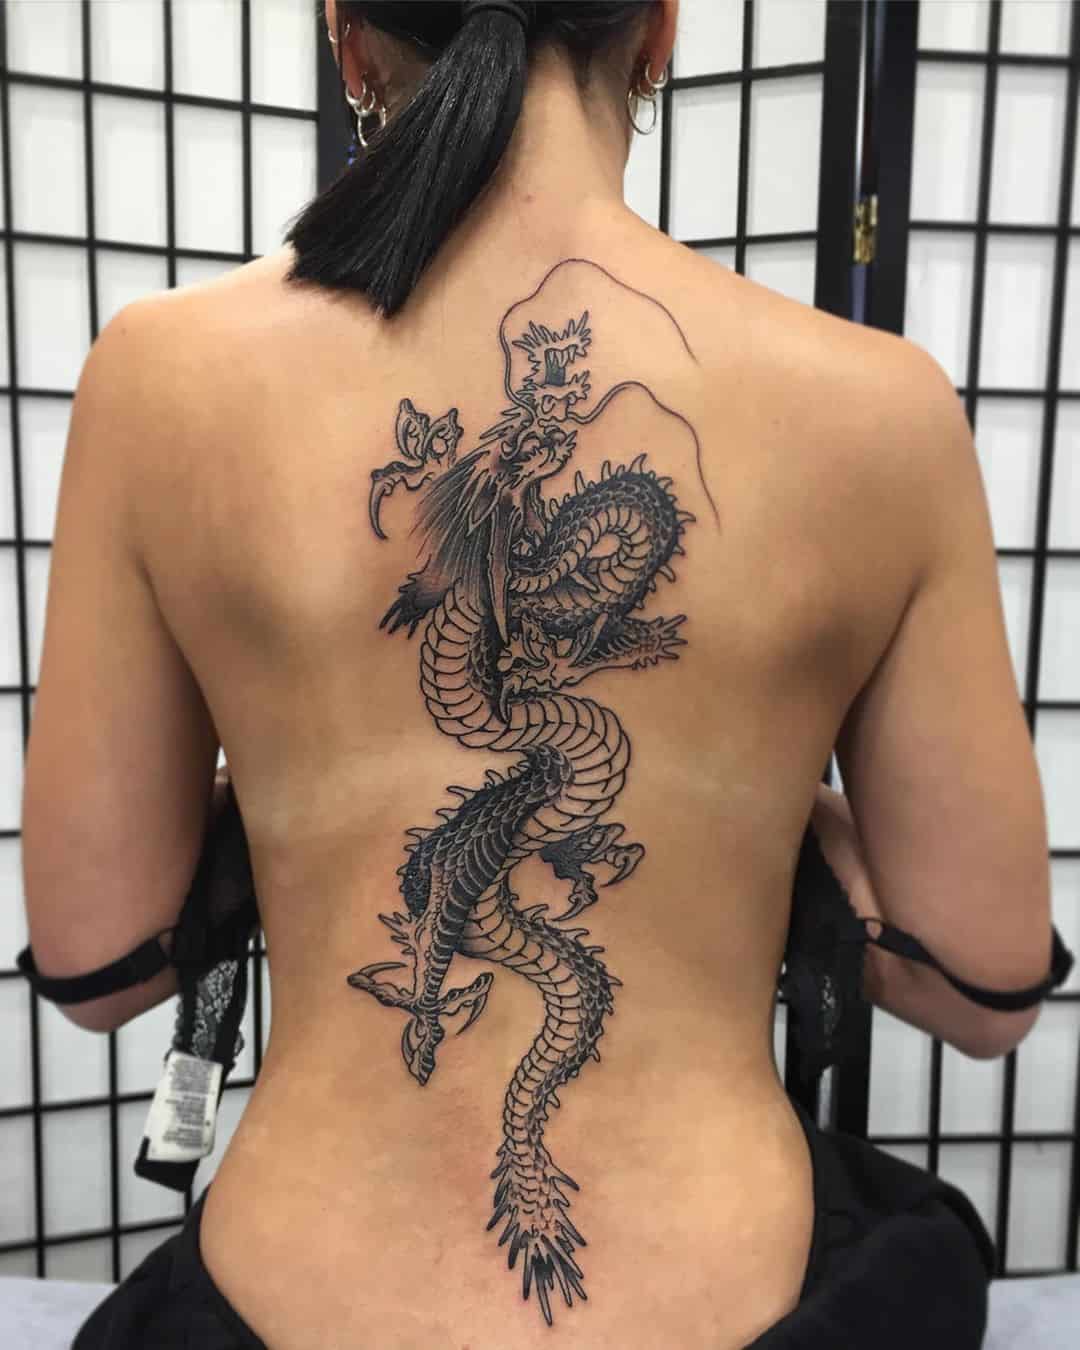 The girl with the dragon tattoo! Little red dragon spine tattoo to fill my  Saturday! Had a blast doing this one! #dragontattoo #reddragon... |  Instagram